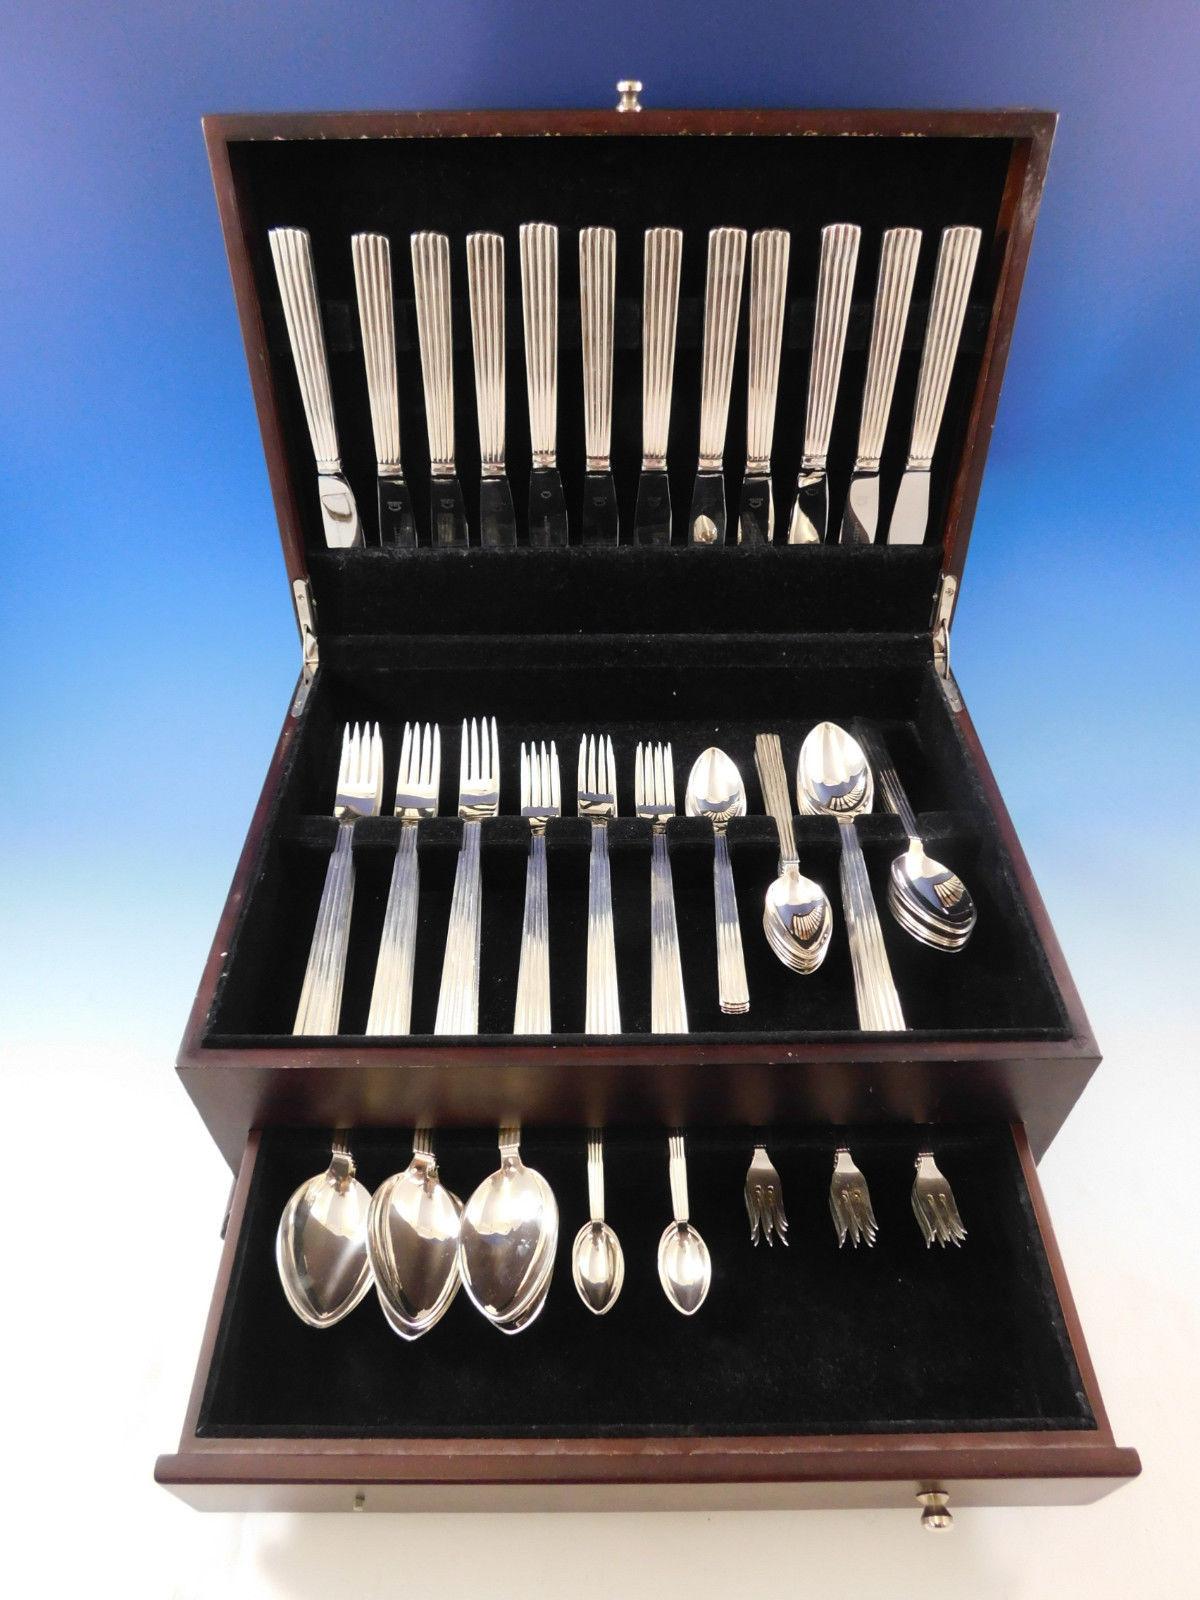 Outstanding dinner size Bernadotte by Georg Jensen sterling silver flatware set of 94 pieces. This set includes:

12 dinner knives, long handle, 9